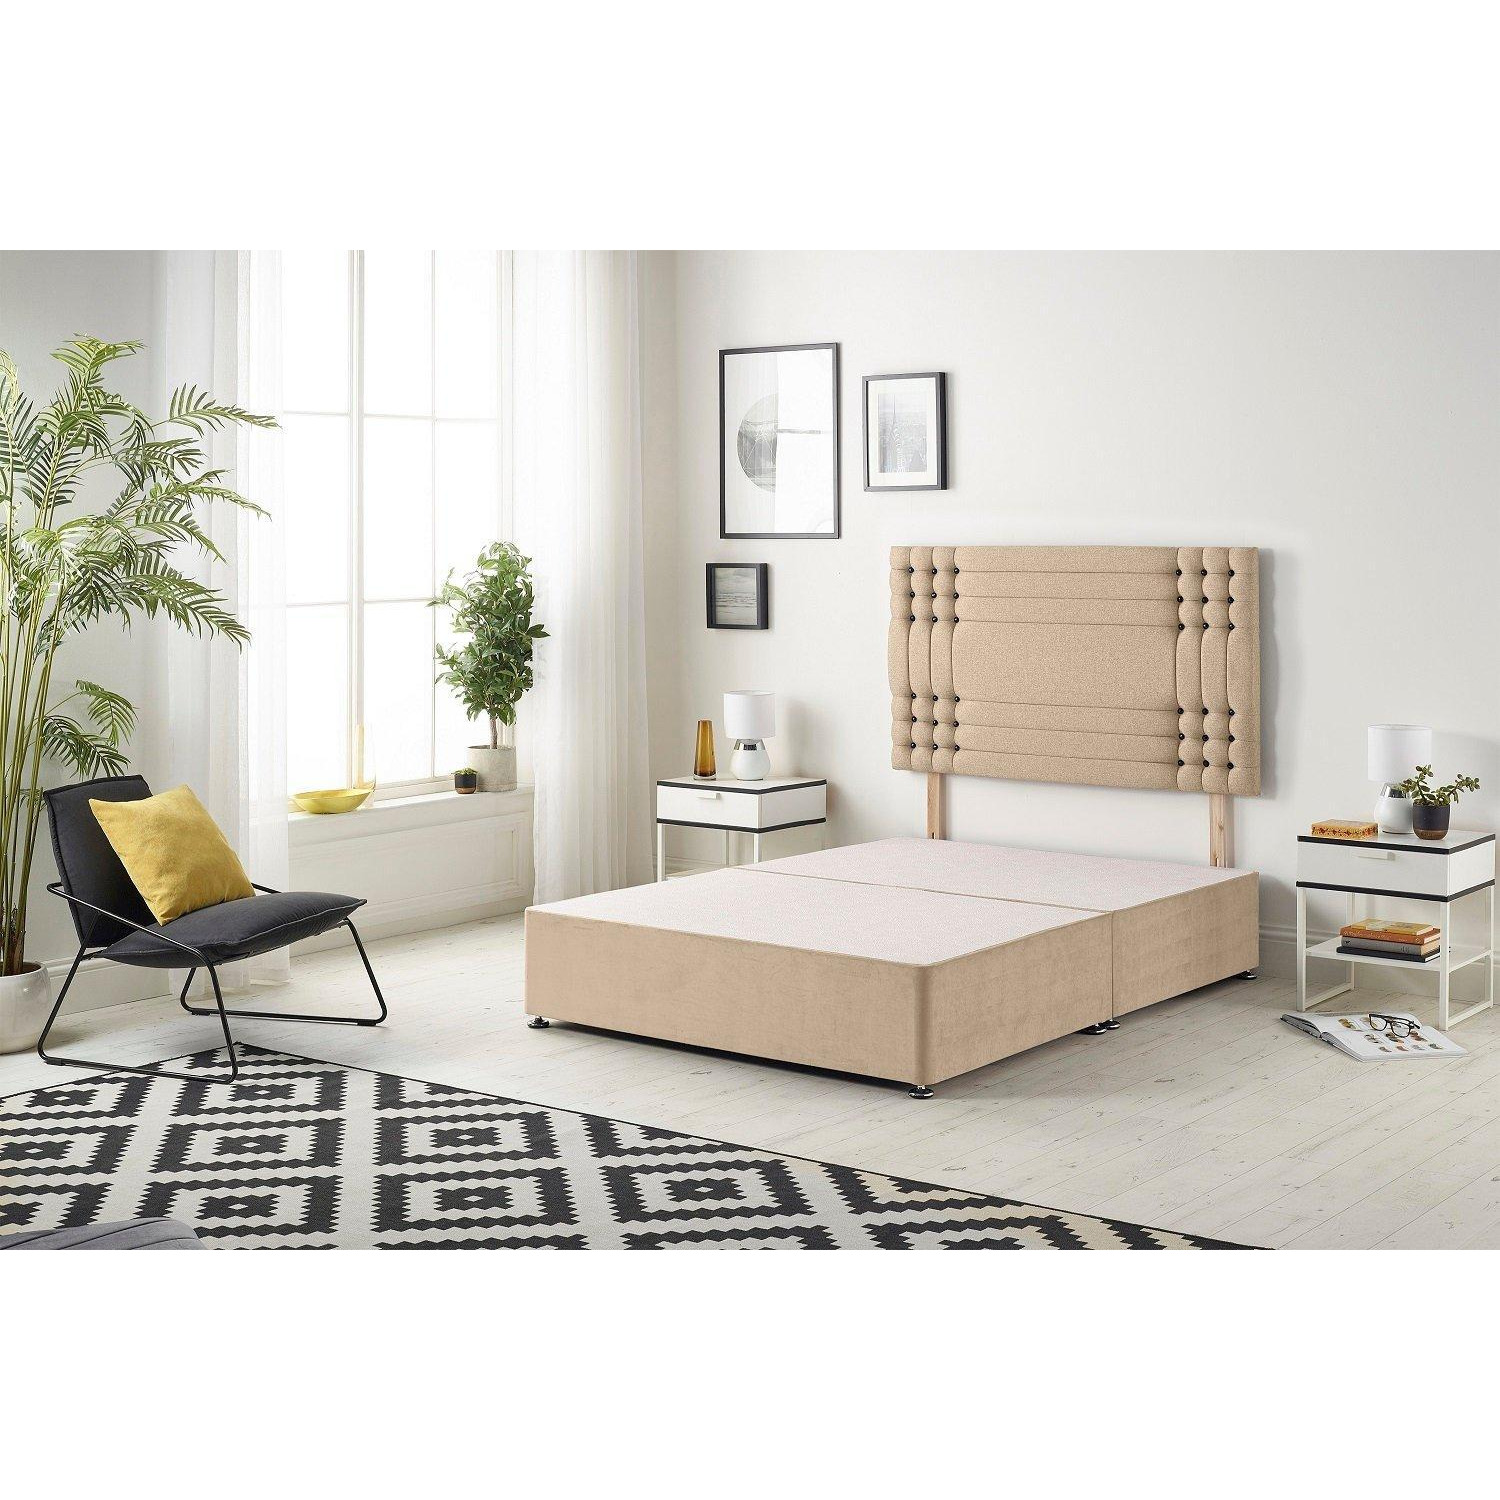 Flexby Divan Bed Base With Headboard Plush - image 1